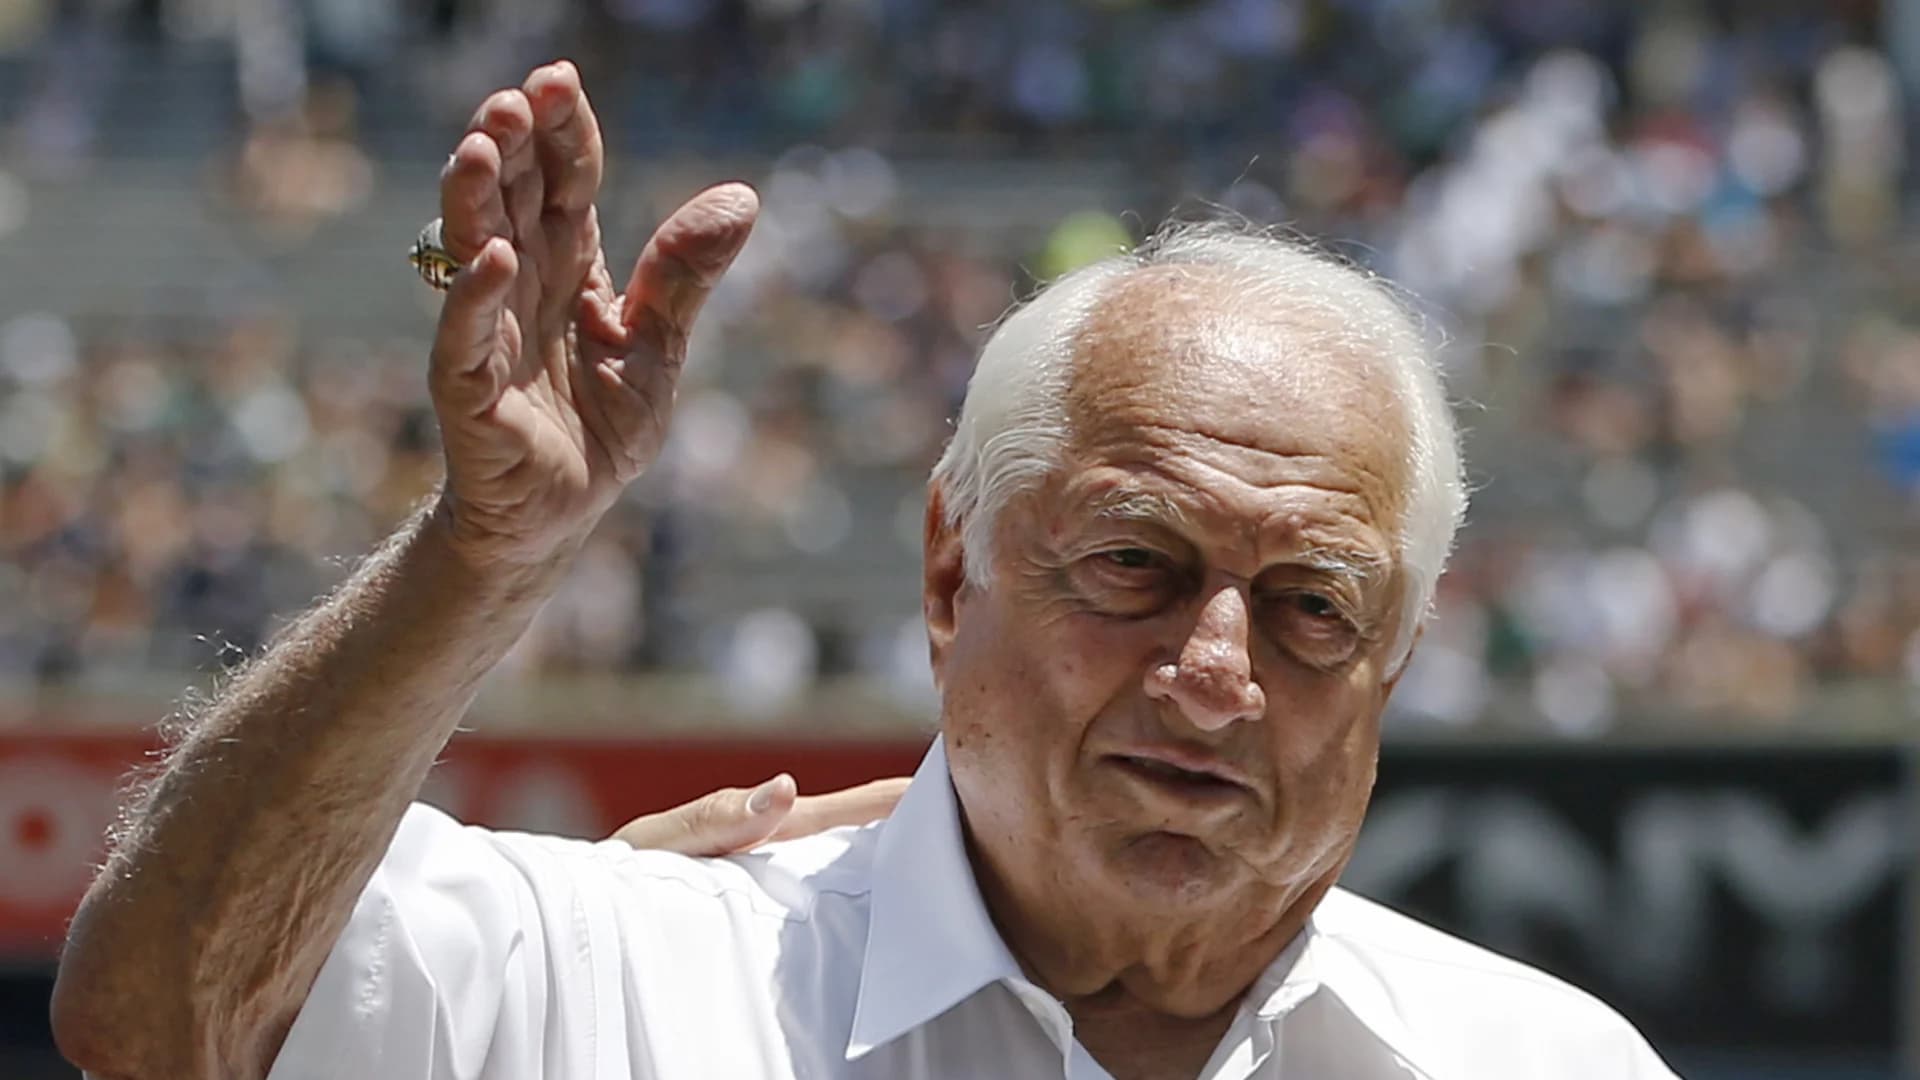 Tommy Lasorda, beloved baseball personality and longtime Dodgers manager, dies at 93